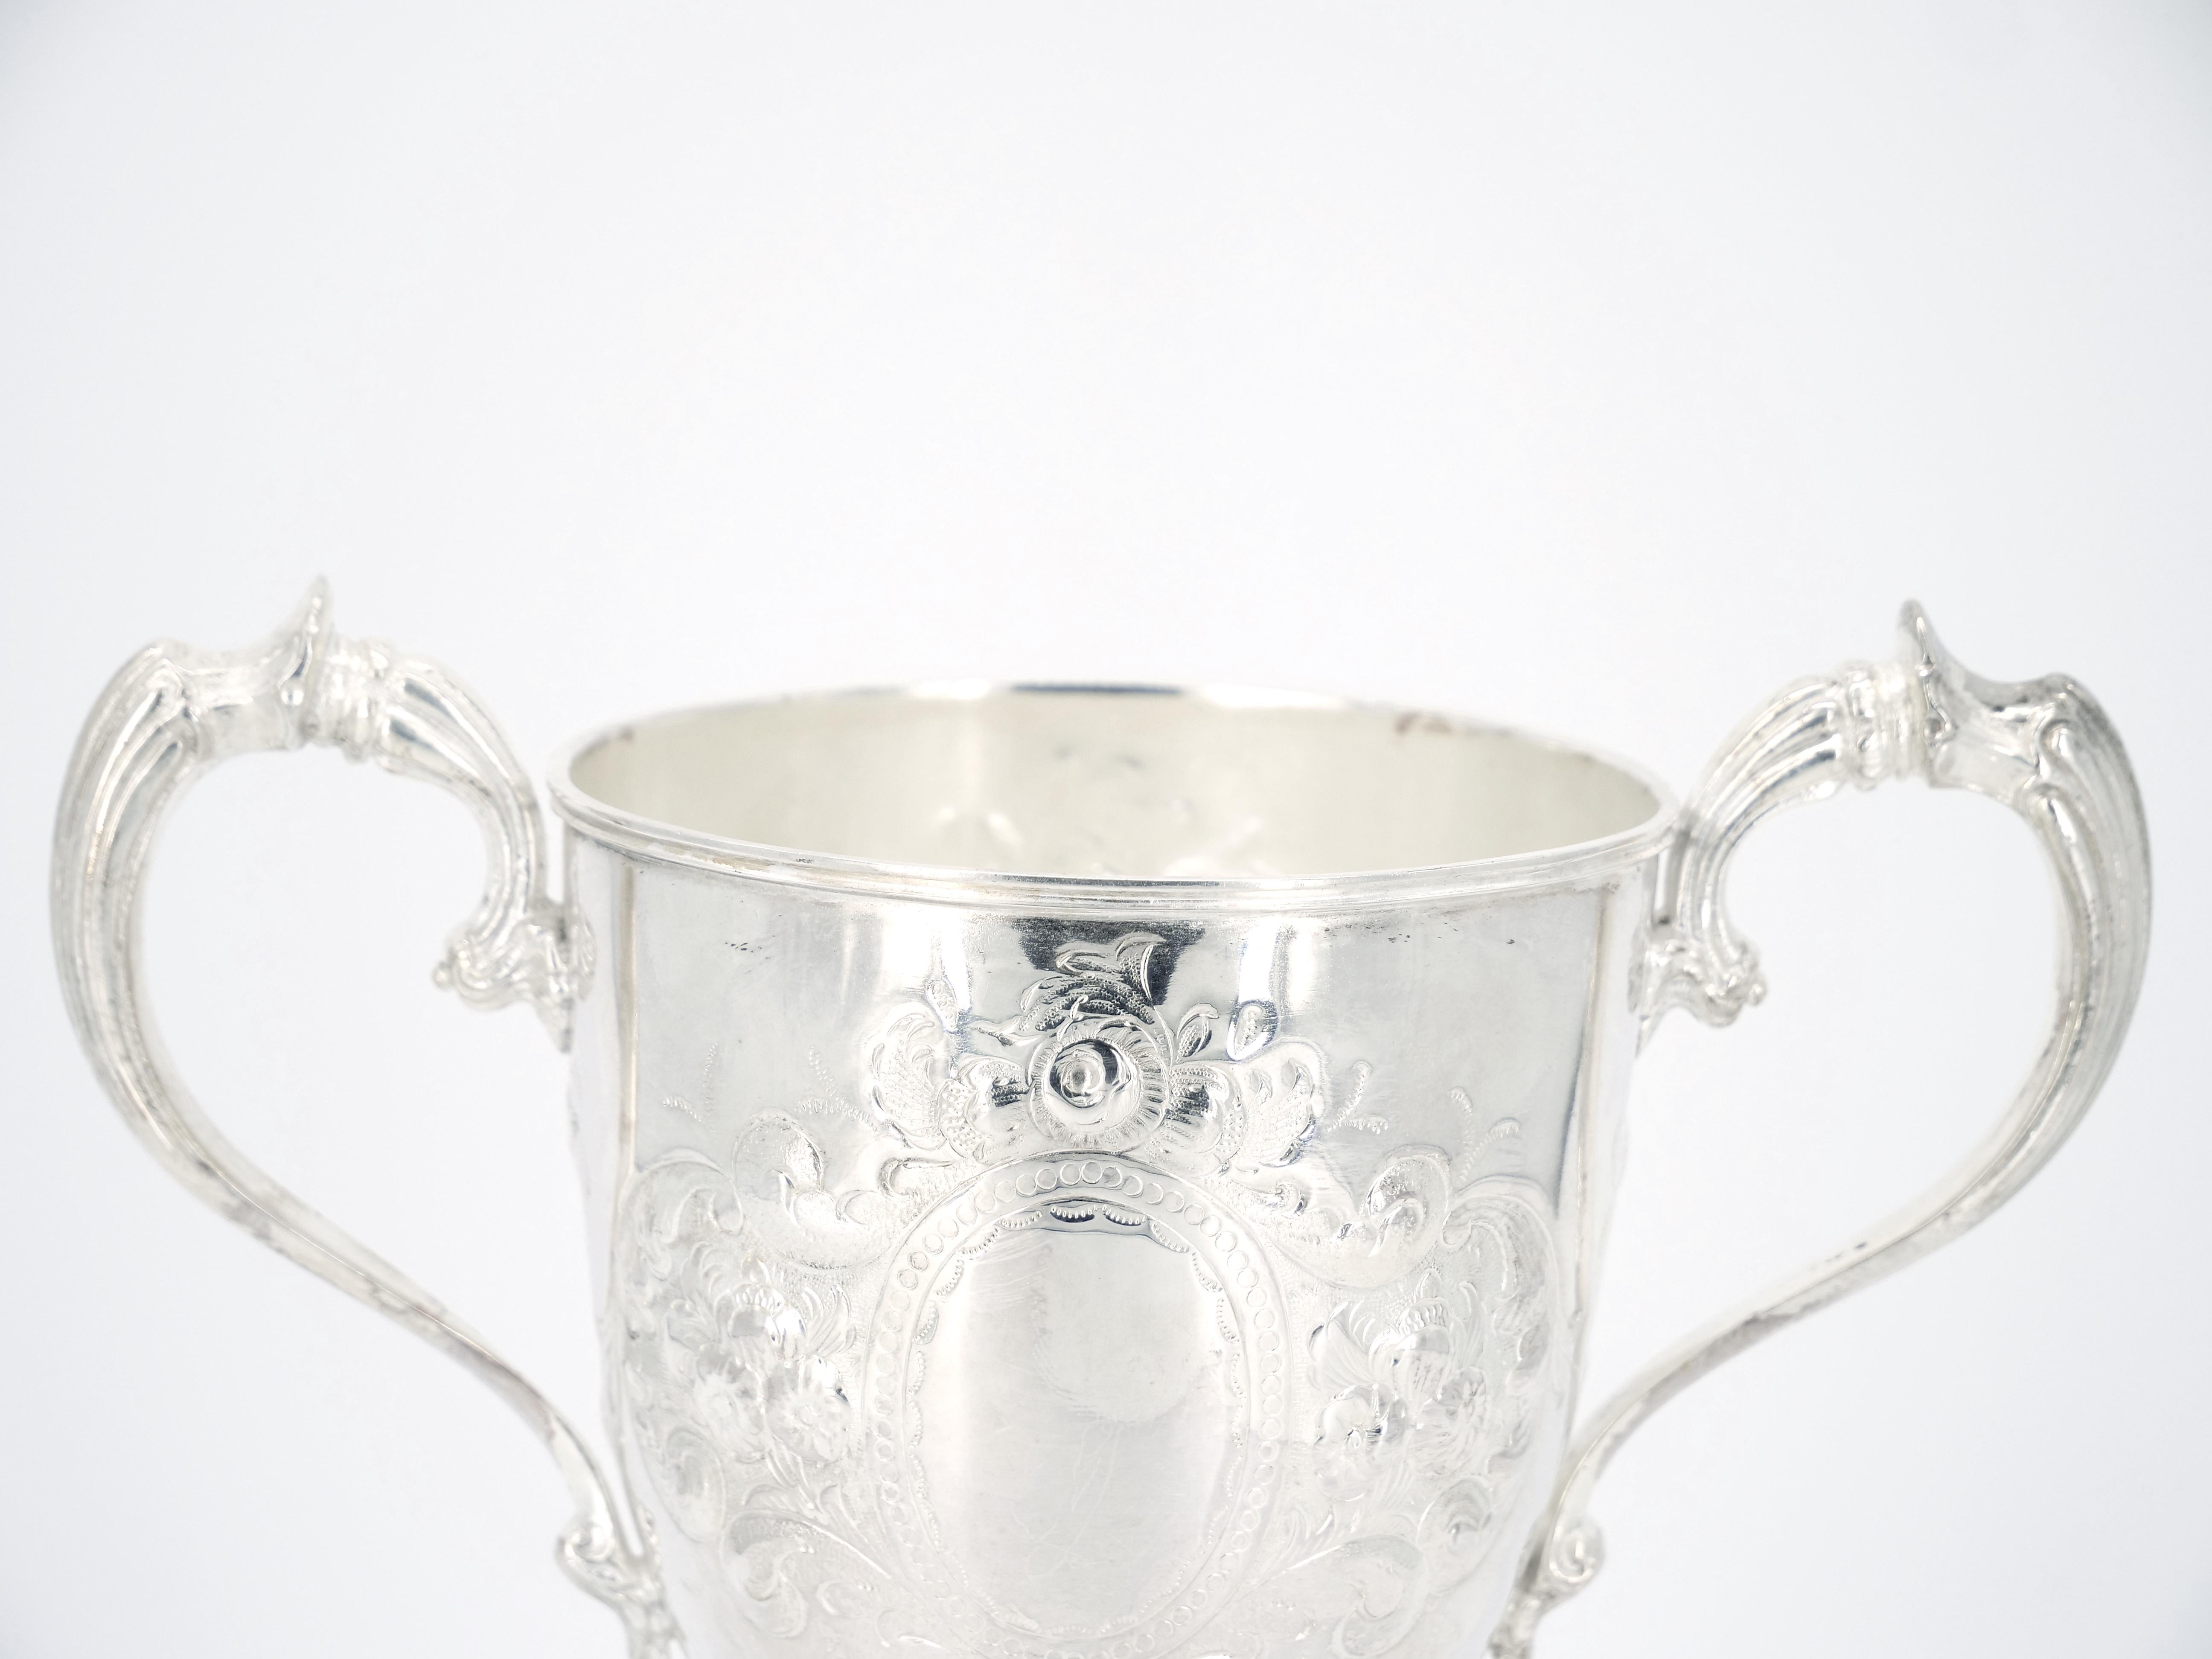 Late 19th Century English Silver Plated Handled Trophy Cup Decorative Vase / Urn For Sale